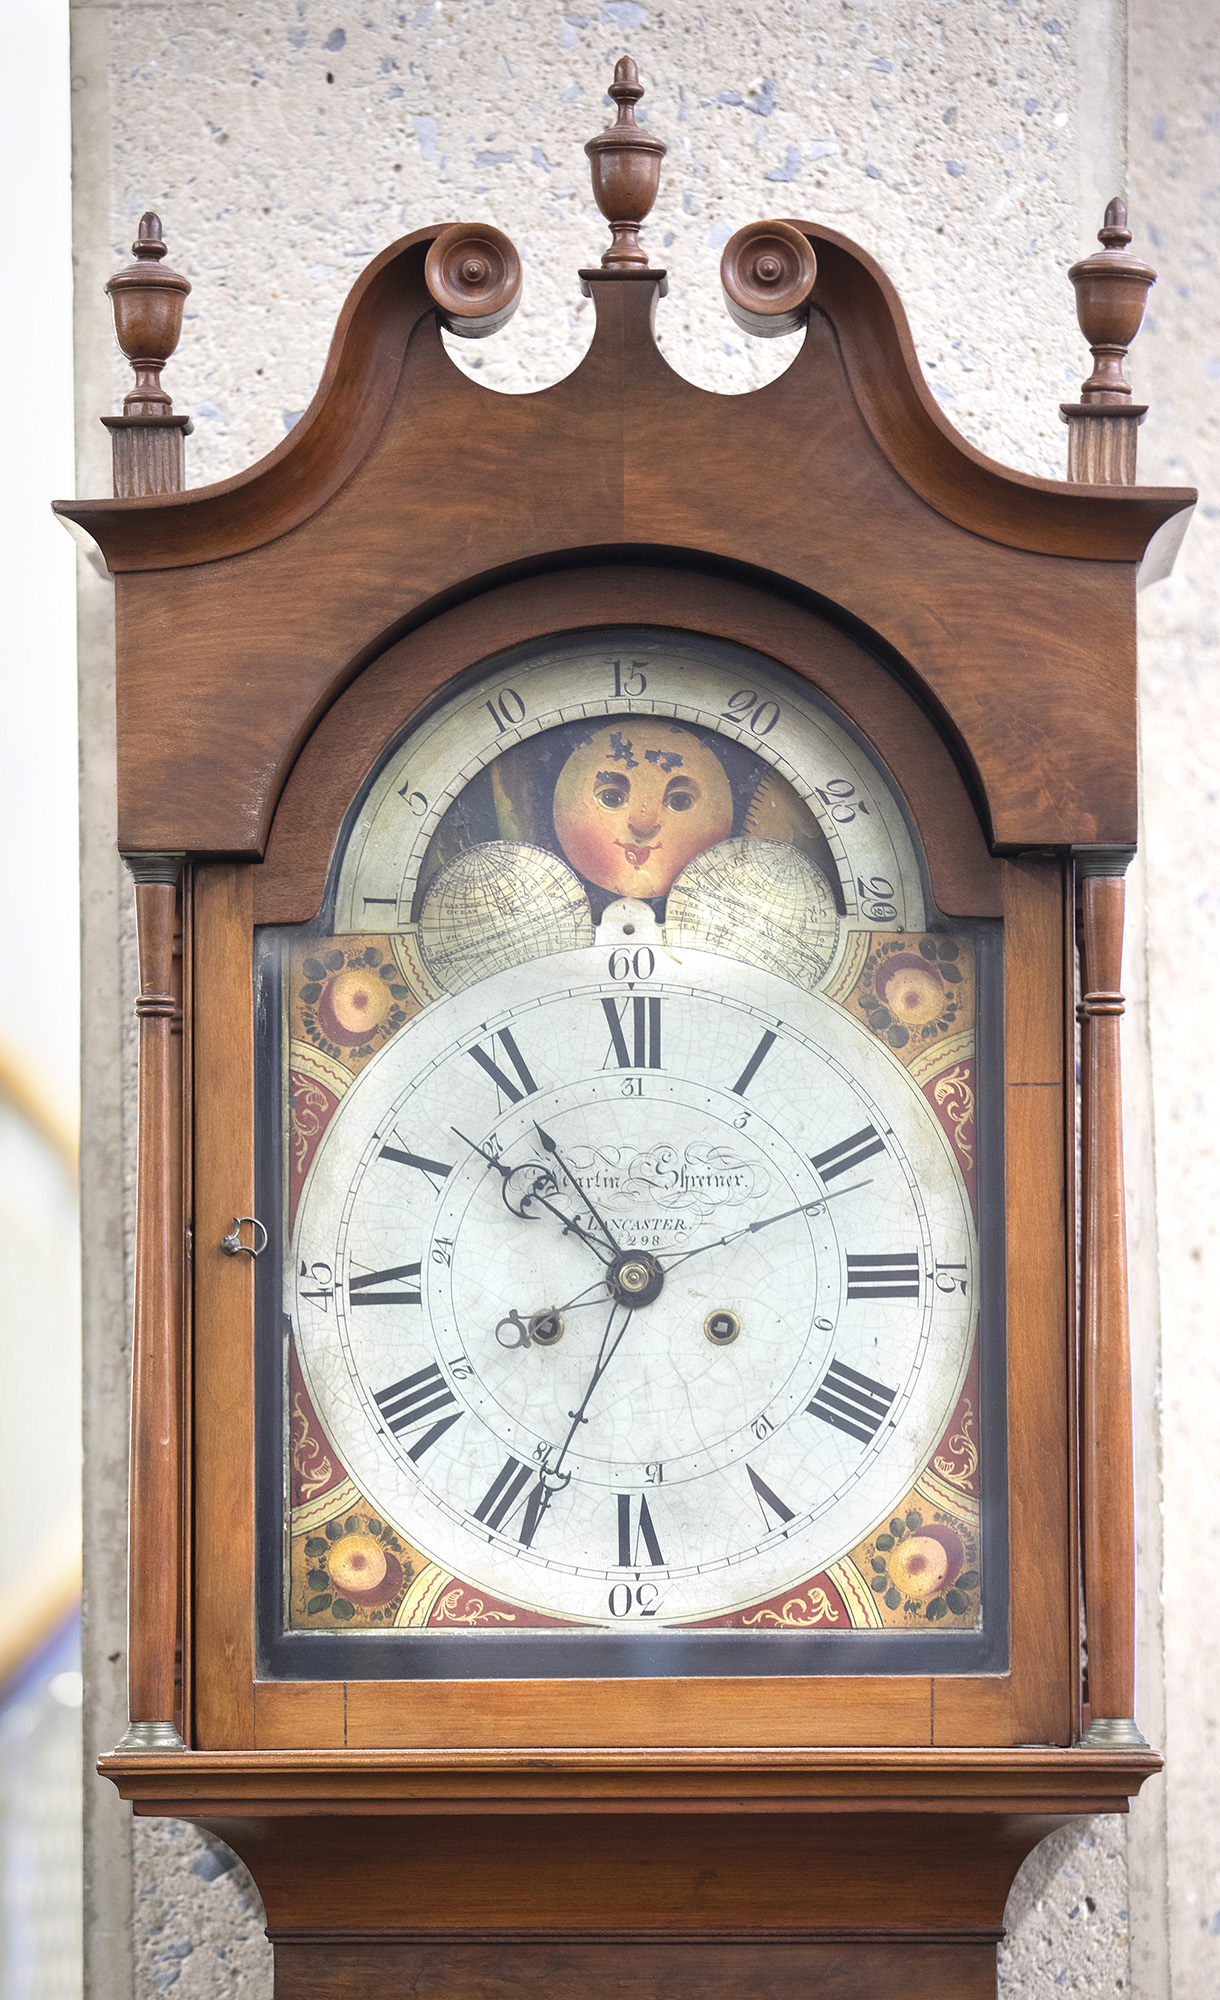 The front of an old grandfather clock